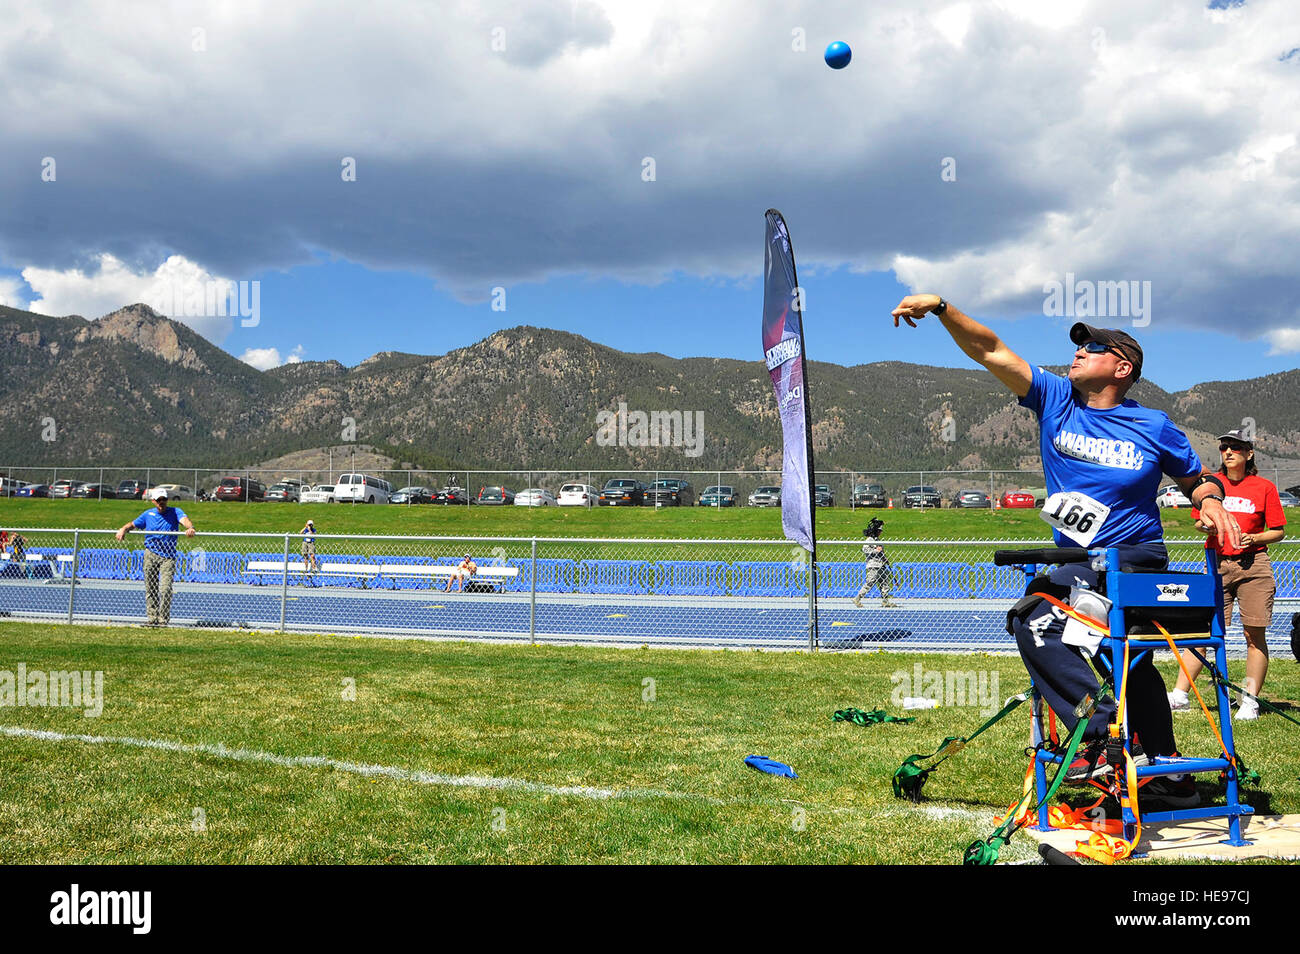 Retired Chief Master Sgt. Damian Orslene hurls a shot put during the 2013 Warrior Games at the U.S. Air Force Academy May 14, 2013, in Colorado Springs, Colo. The Warrior Games enable service members and veterans who are injured, ill or wounded to compete in a variety of Paralympic-style sports. Staff Sgt. Christopher Boitz) Stock Photo